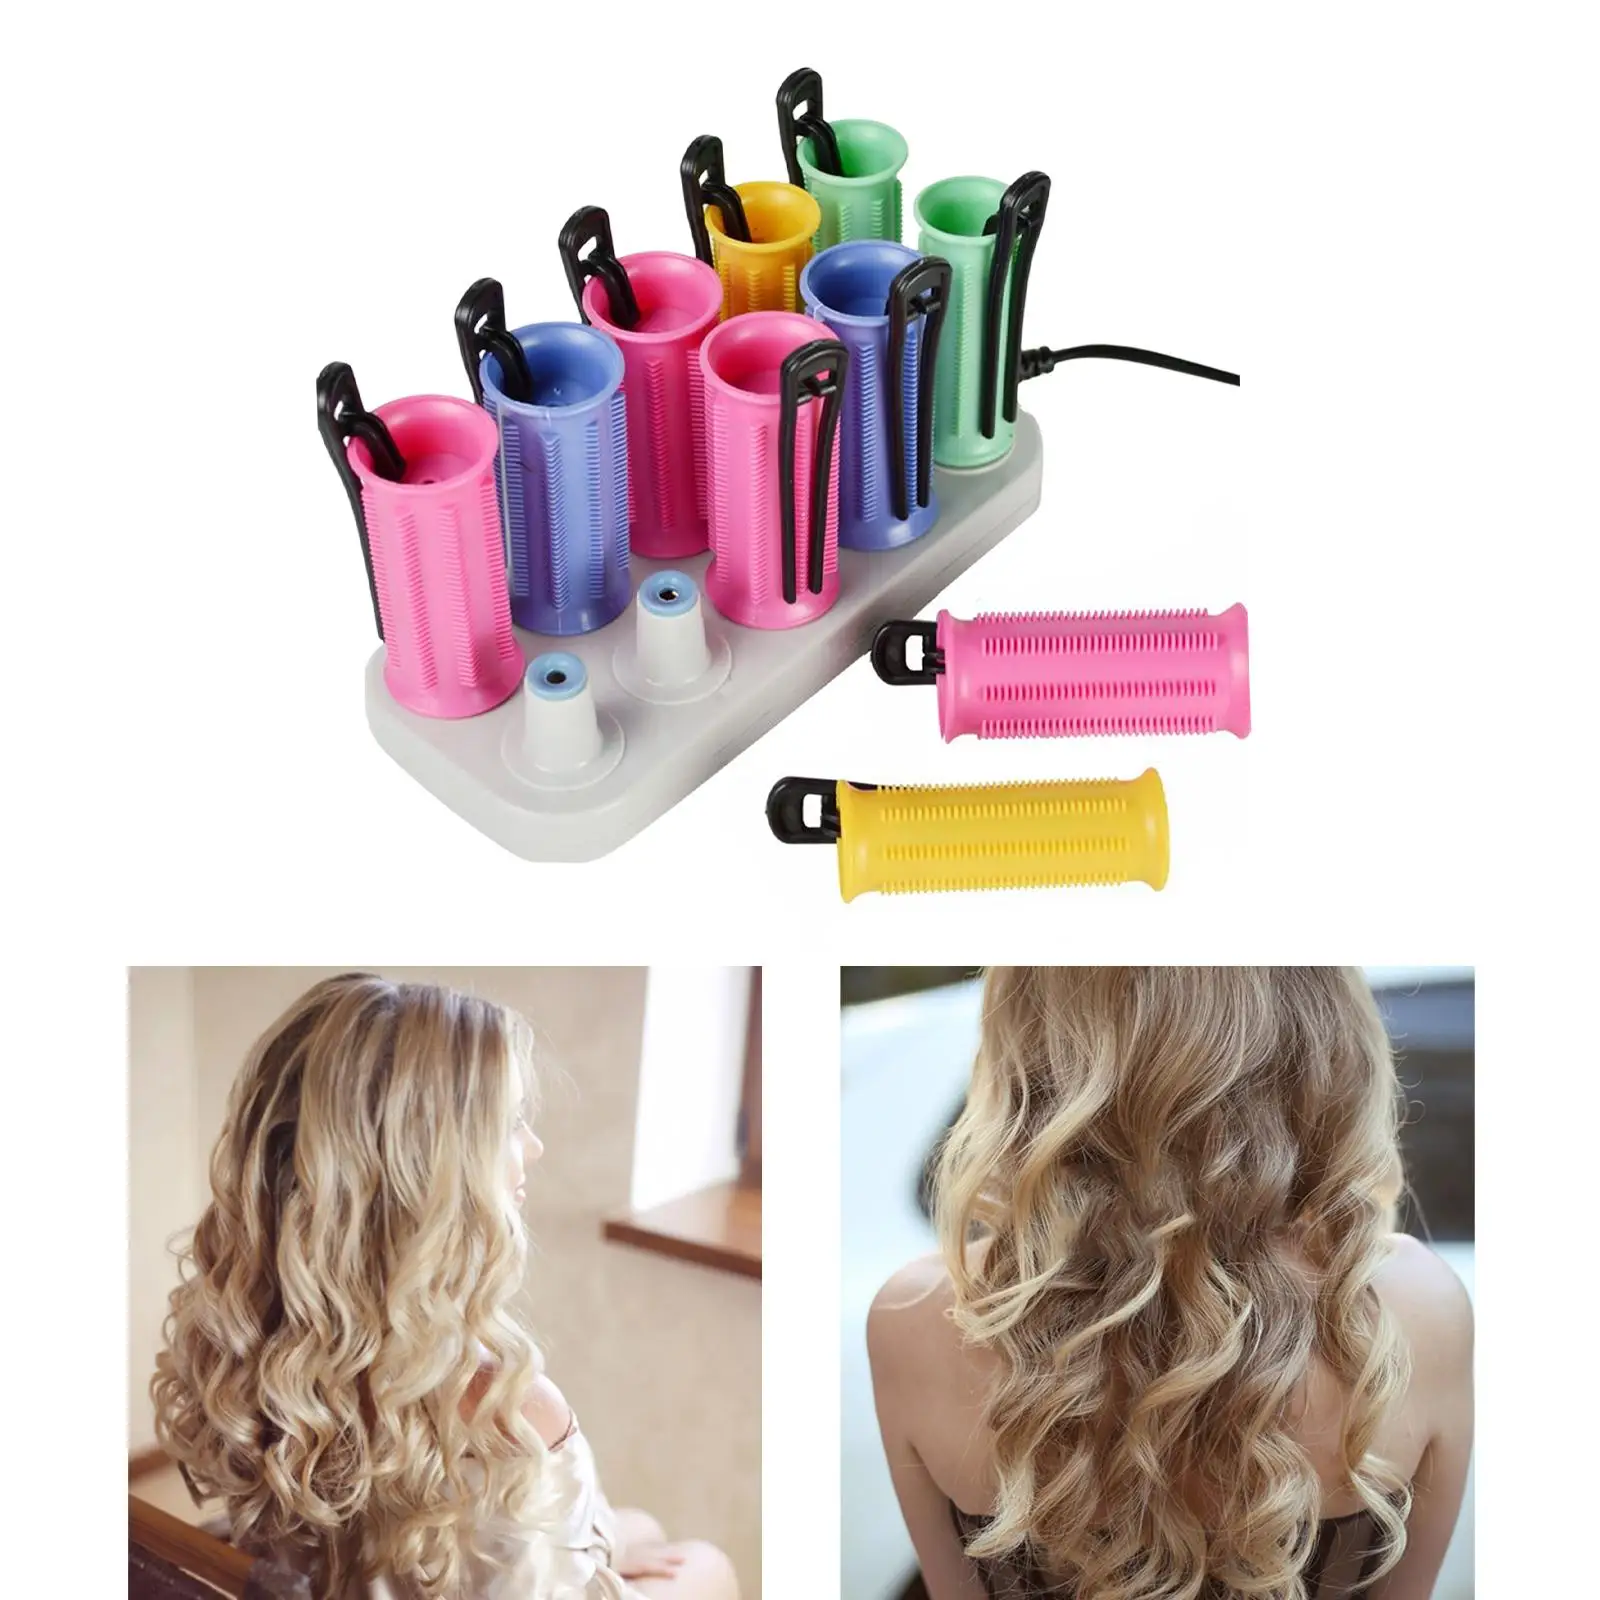 Electric Heated Hair Rollers Hair Styling Tool Hair Curly Sticks Hair Tube with 10Pcs Hair Pins Curlers for Short Long Hair